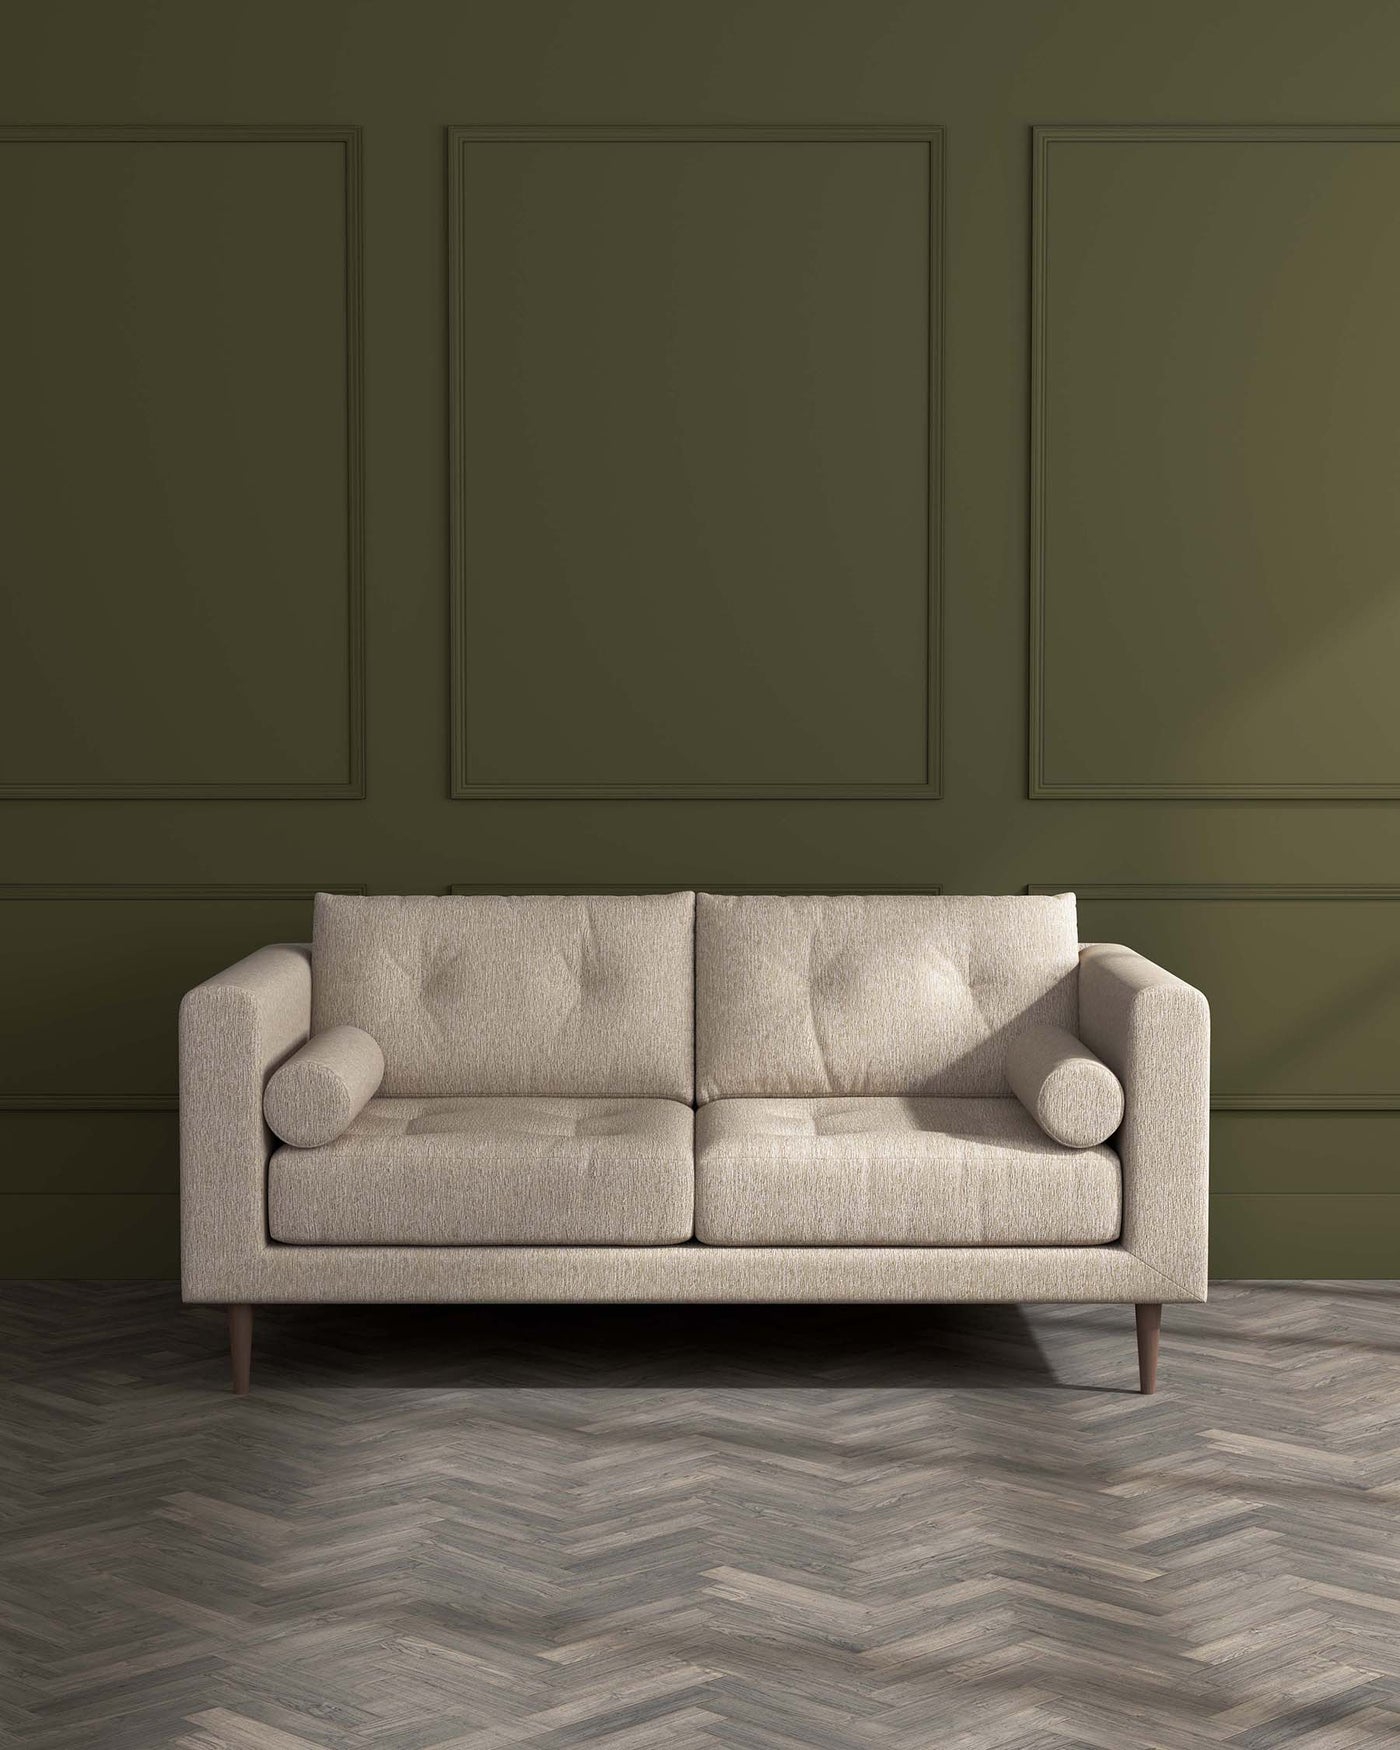 A modern three-seater sofa with a textured beige upholstery, featuring clean lines, square padded cushions, and cylindrical armrest bolsters. It is supported by four round, tapered wooden legs, set against a herringbone-patterned wood floor and olive green panelled wall background.